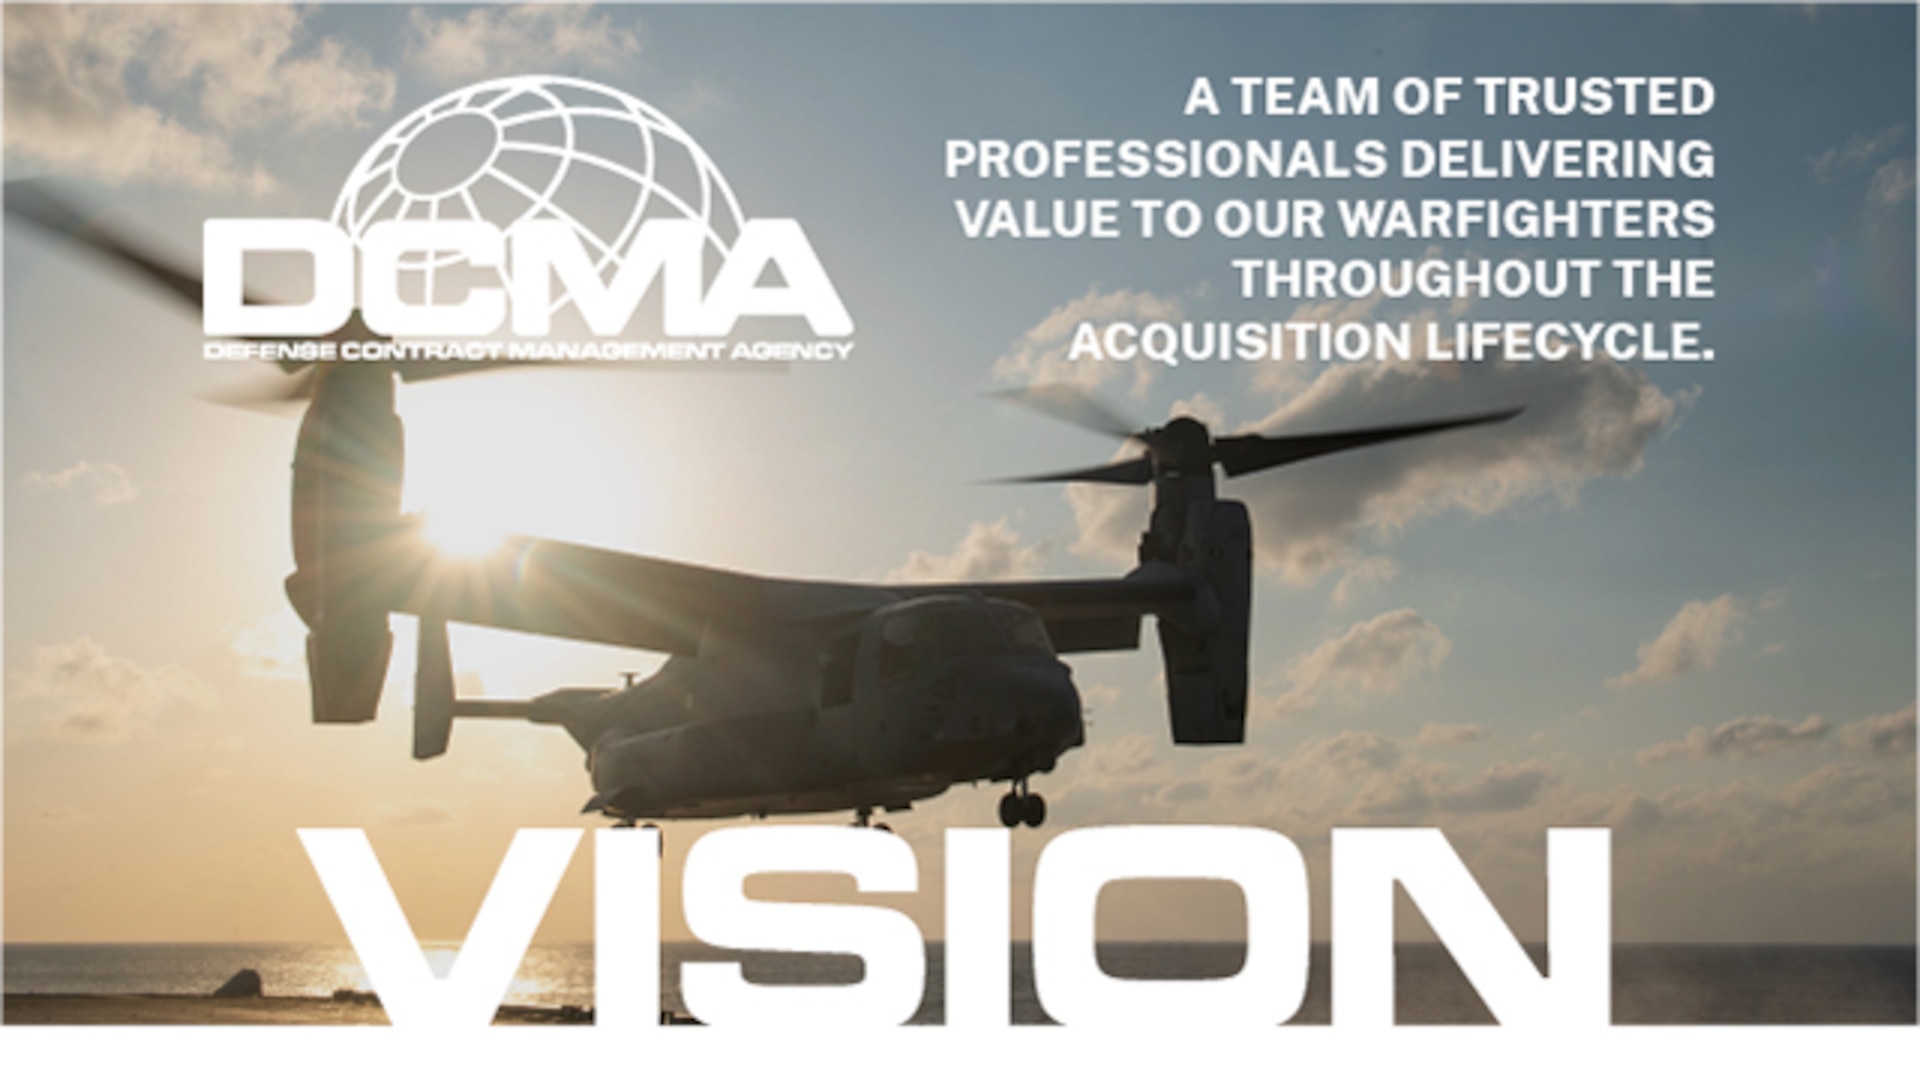 Graphic of Osprey aircraft with text saying vision